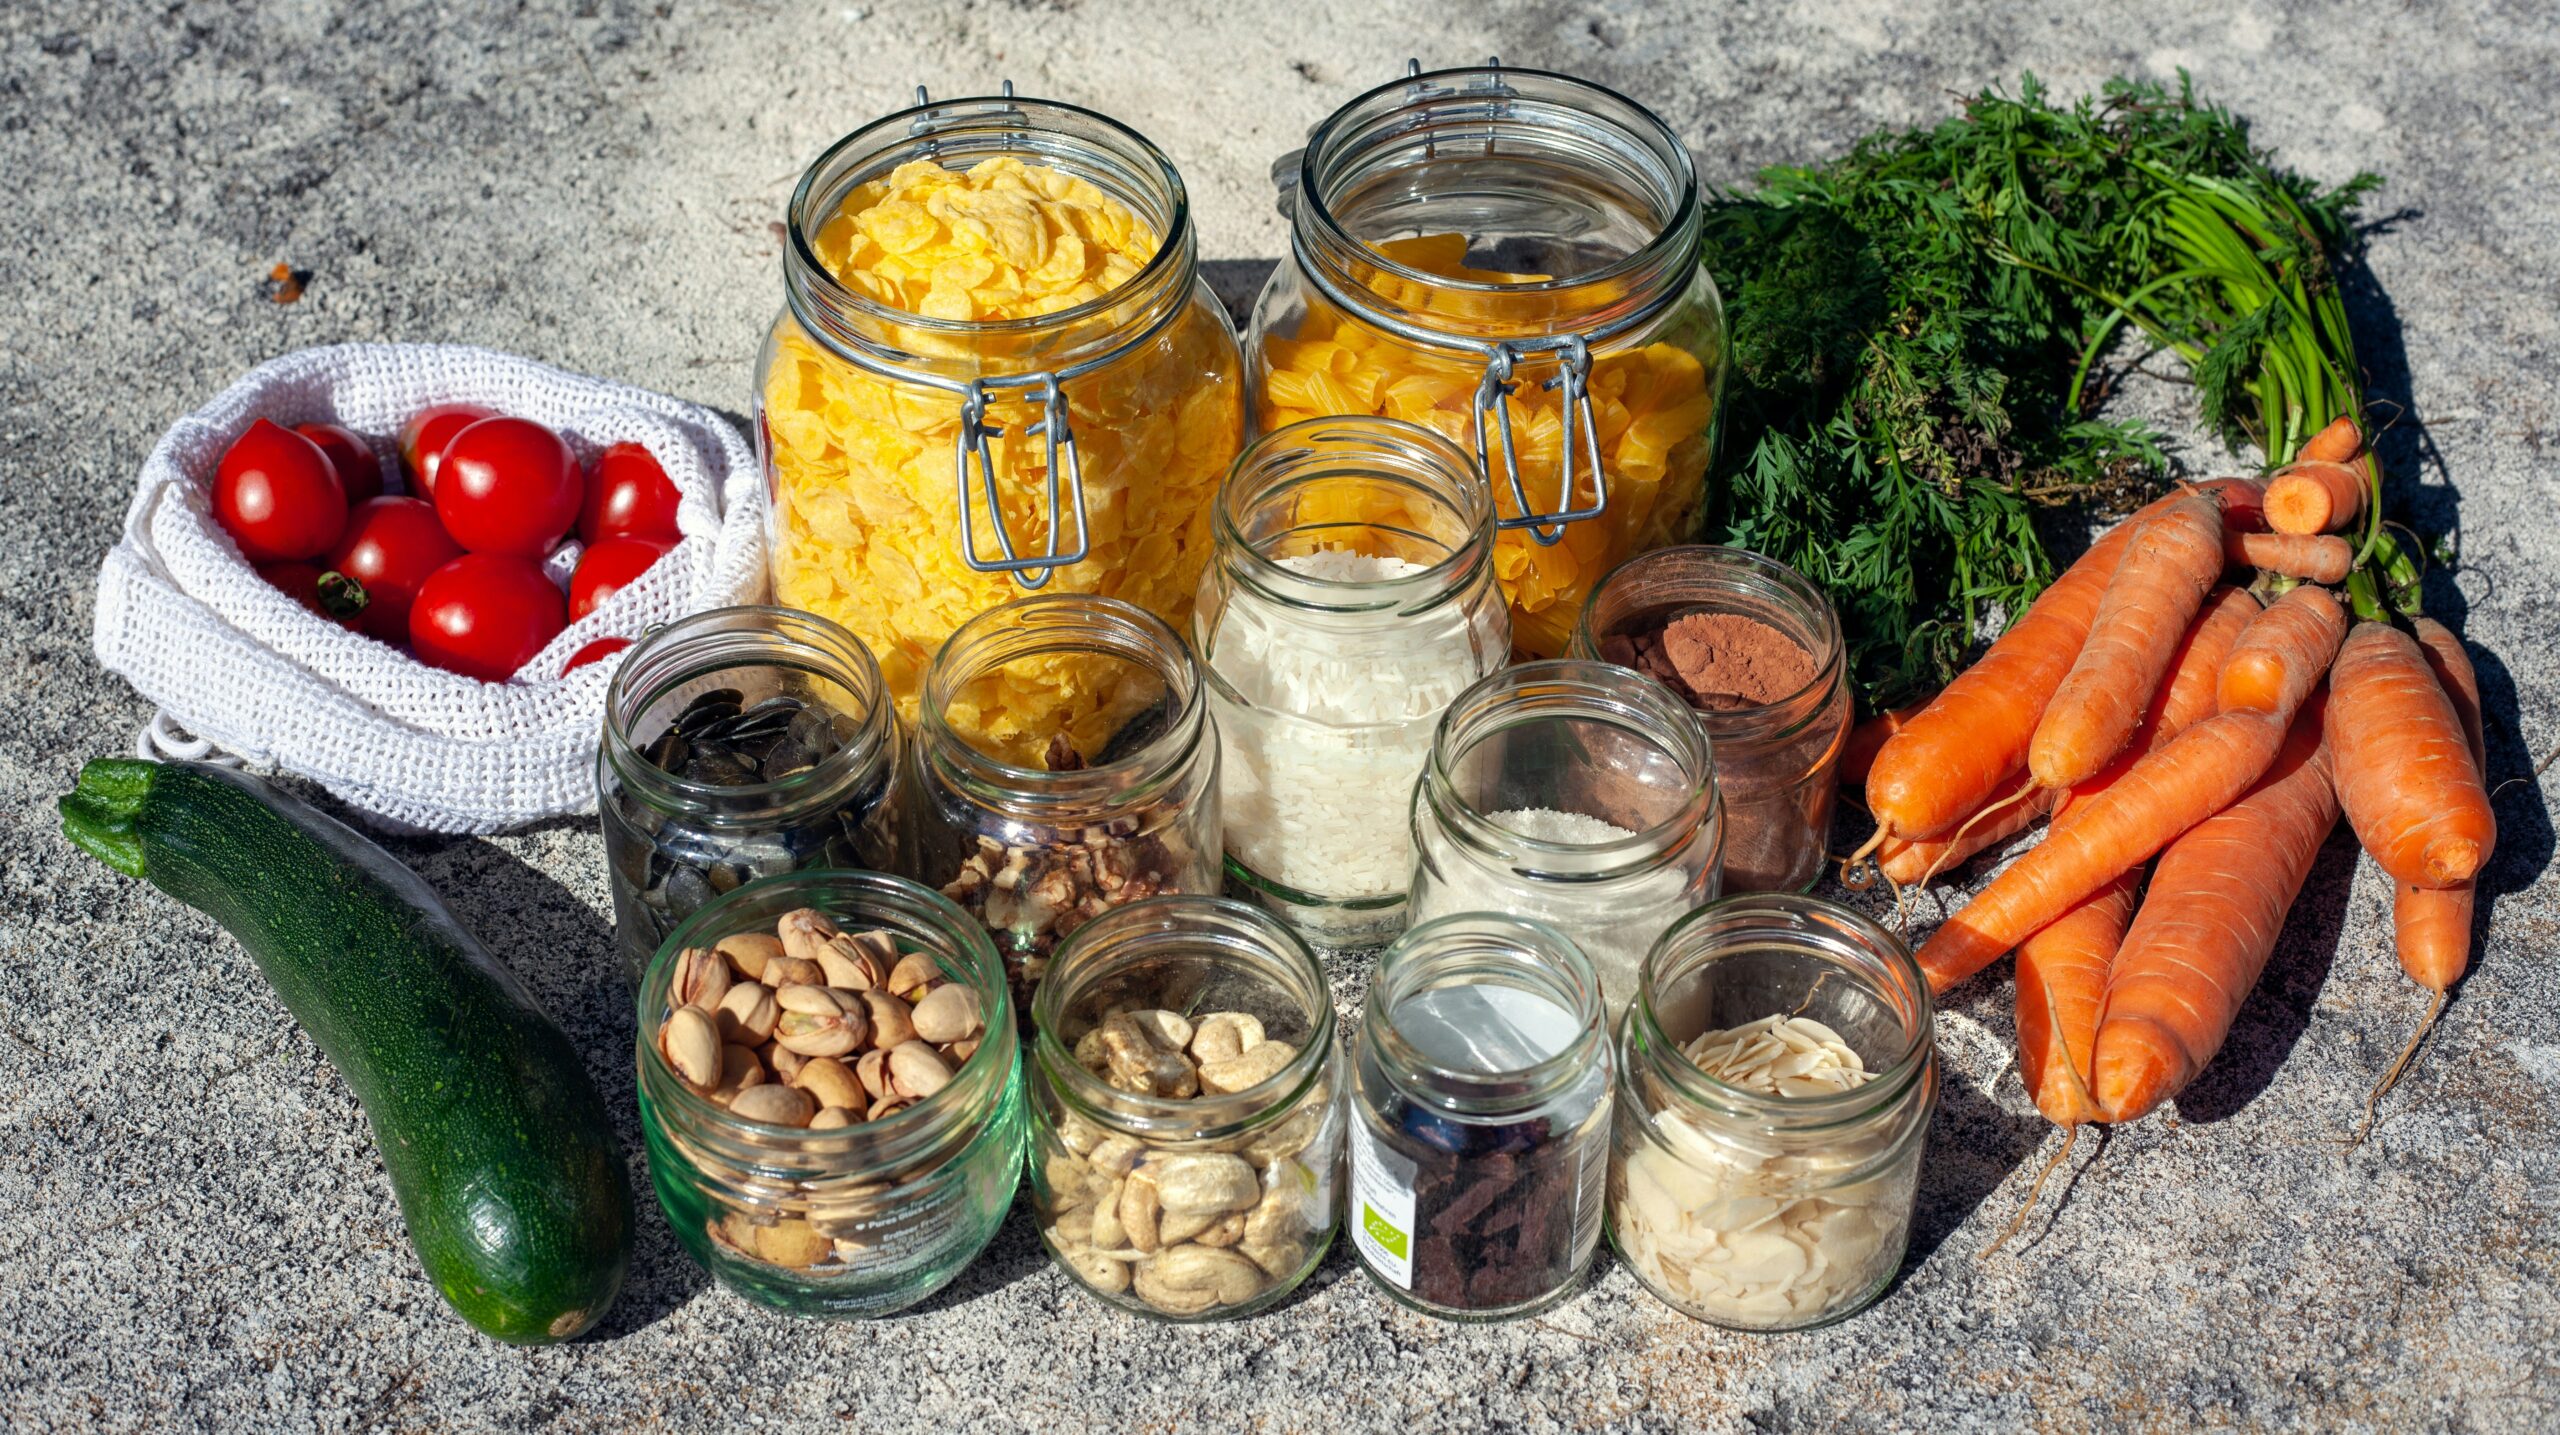 food items stored in jars for freshness prior to being used in zero waste meals